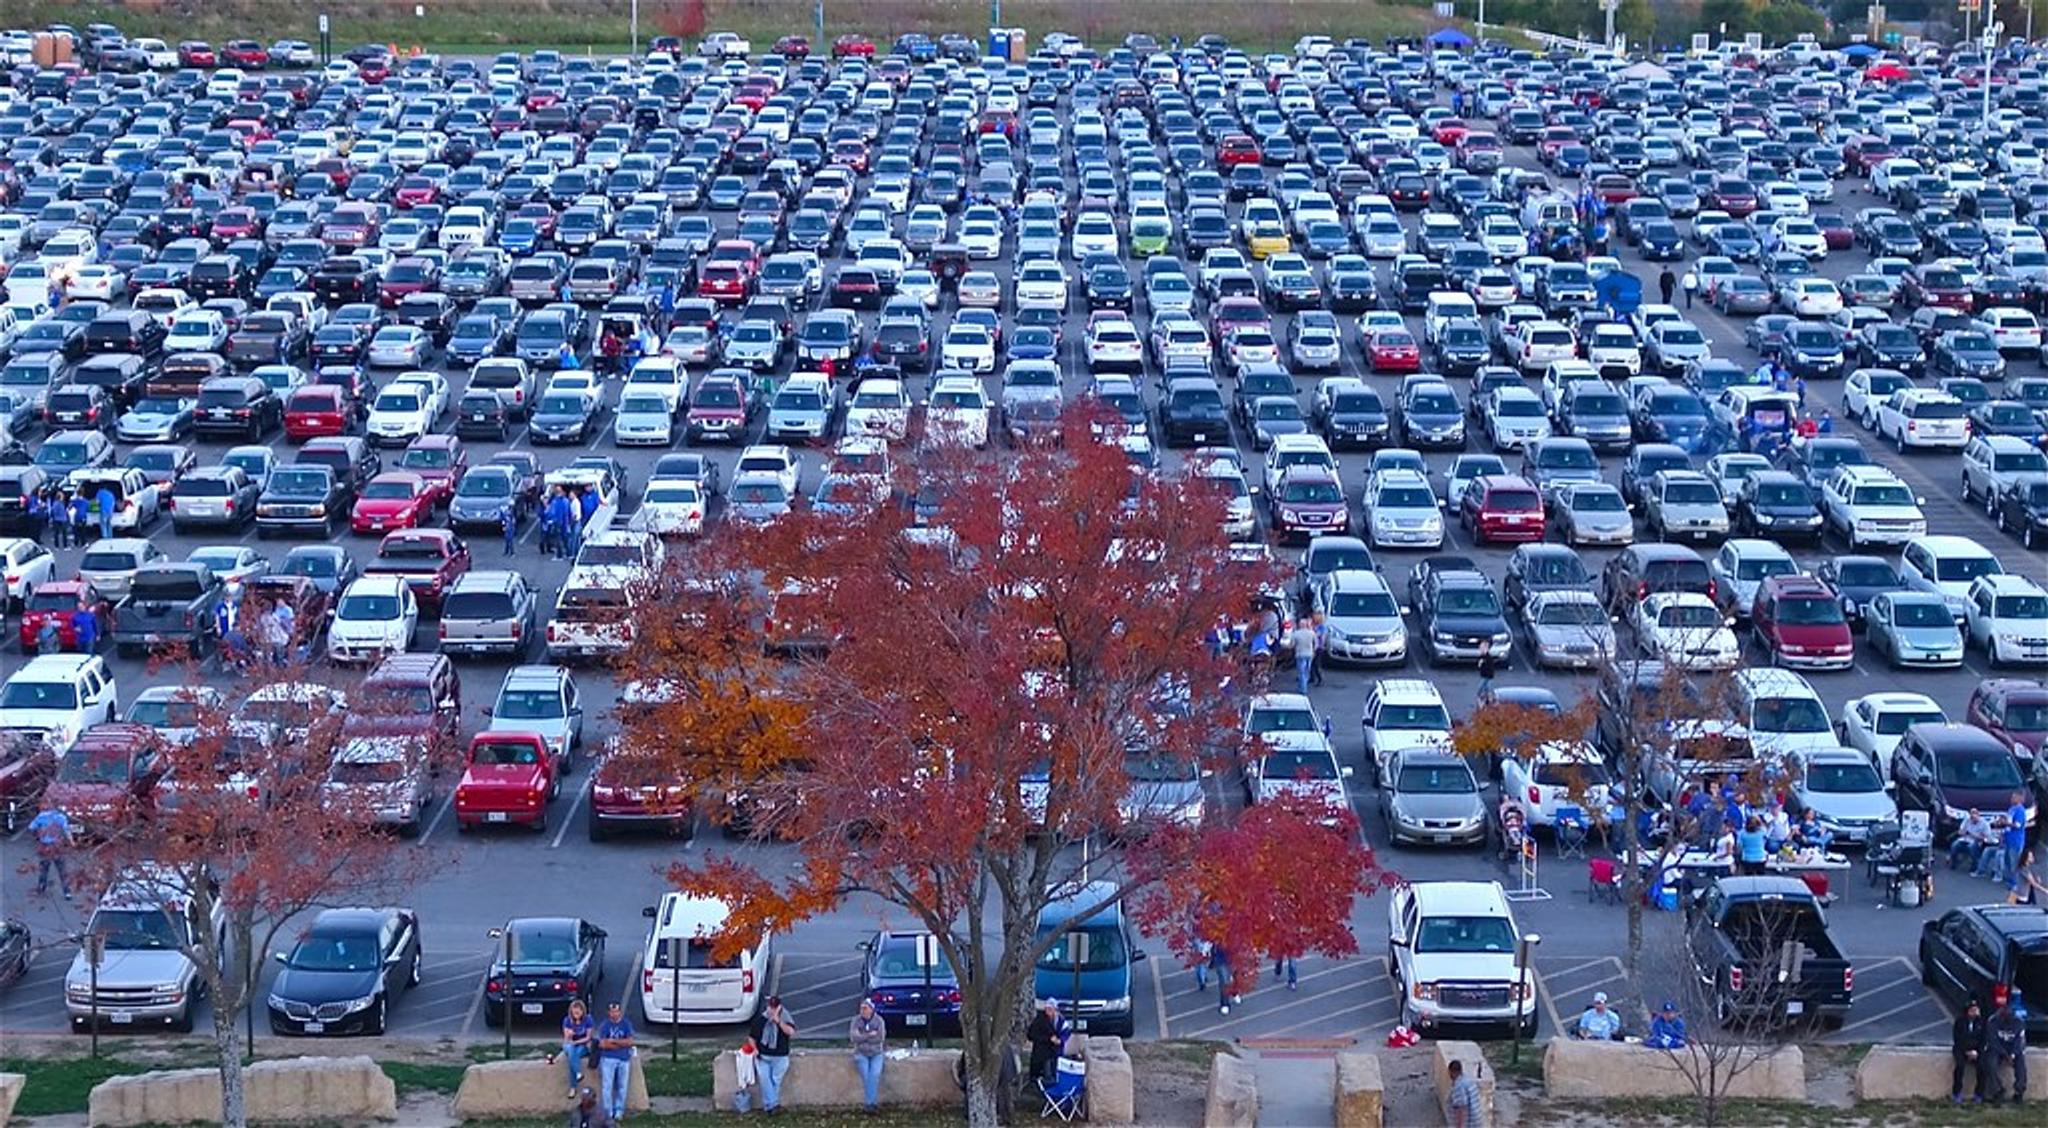 Hundreds of cars in a parking lot